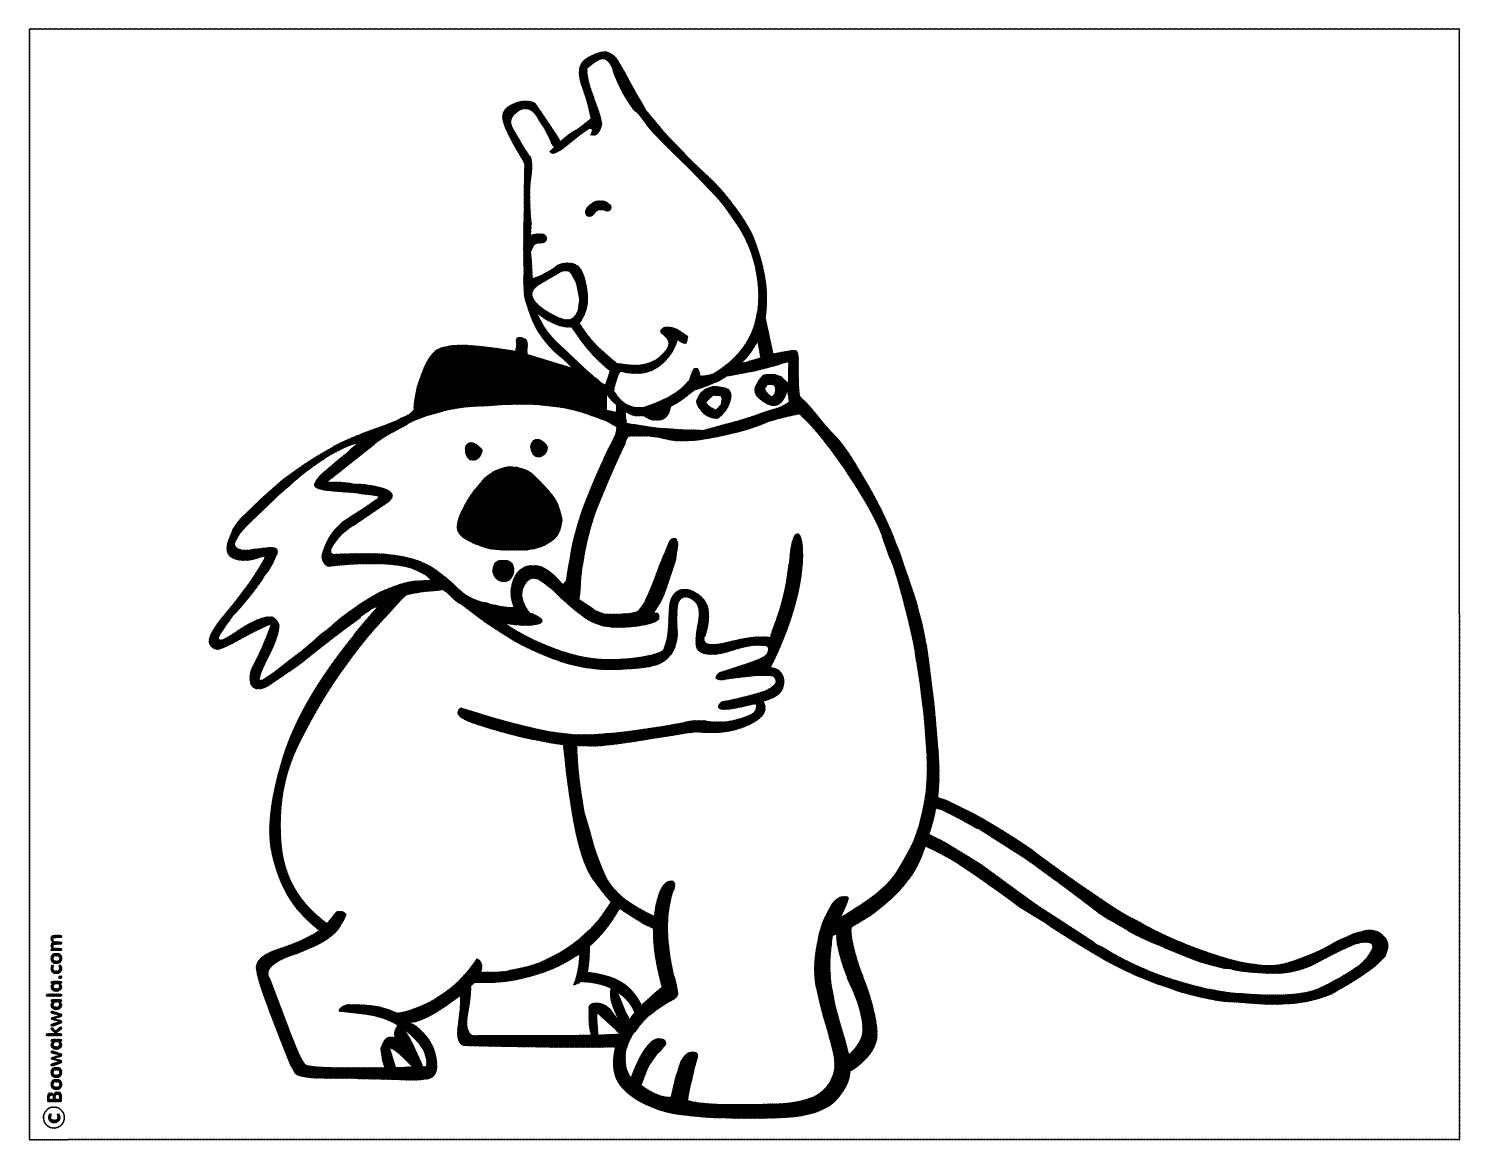 Cuddle coloring #20, Download drawings